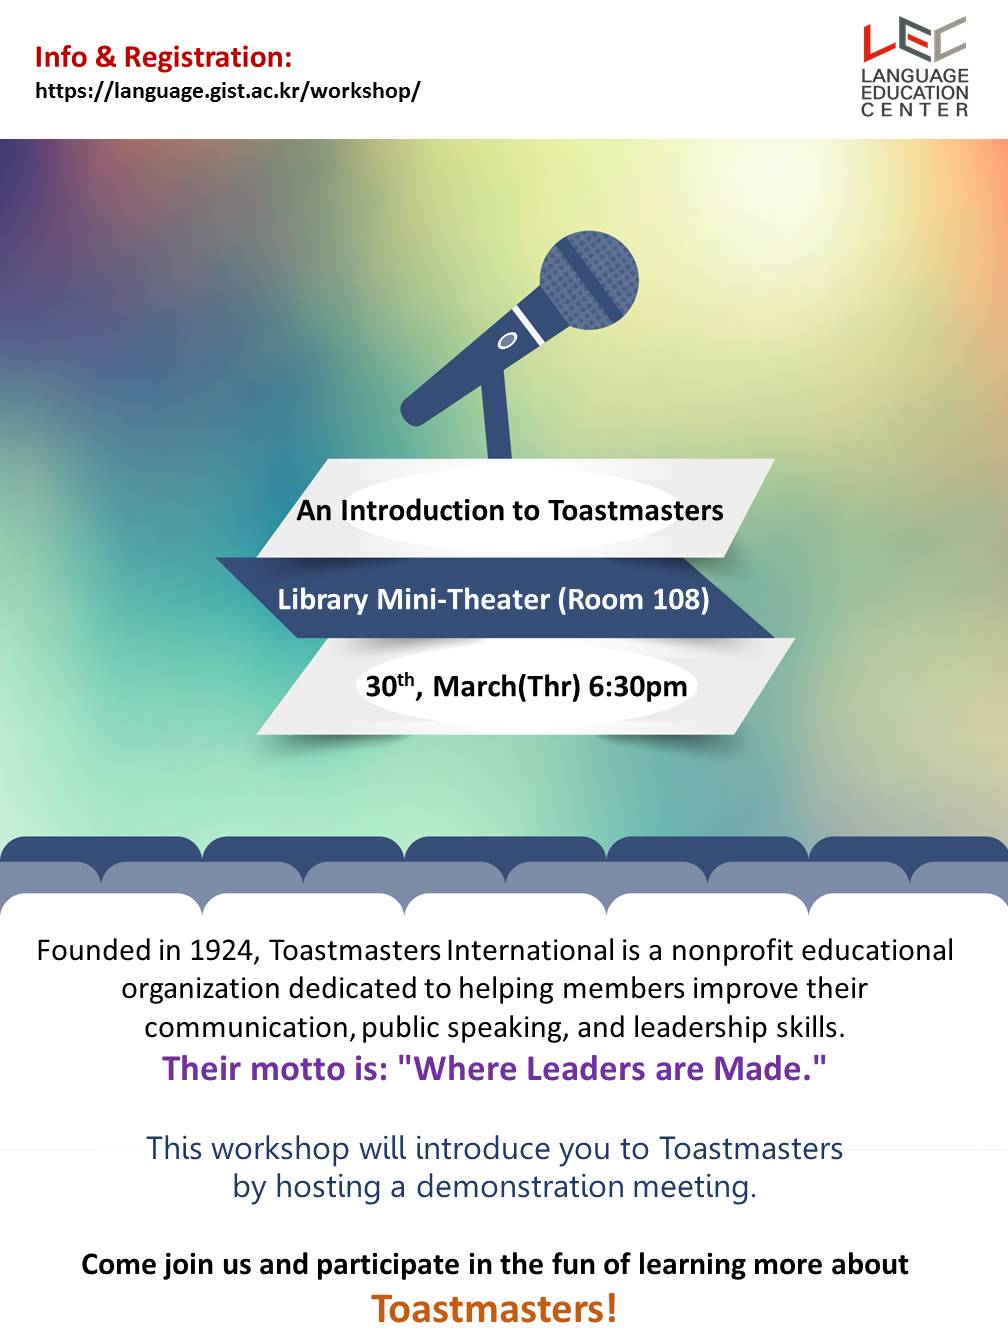  Info & Registration:  LANGUAGE https://language.gist.ac.kr/workshop/  An Introduction to Toastmasters Library Mini-Theater(Room 108) 30th, March(Thr) 6:30pm Founded in 1924, Toastmasters International is a nonprofit educational organization dedicated to helping members improve their communication, public speaking, and leadership skills. Their motto is: 